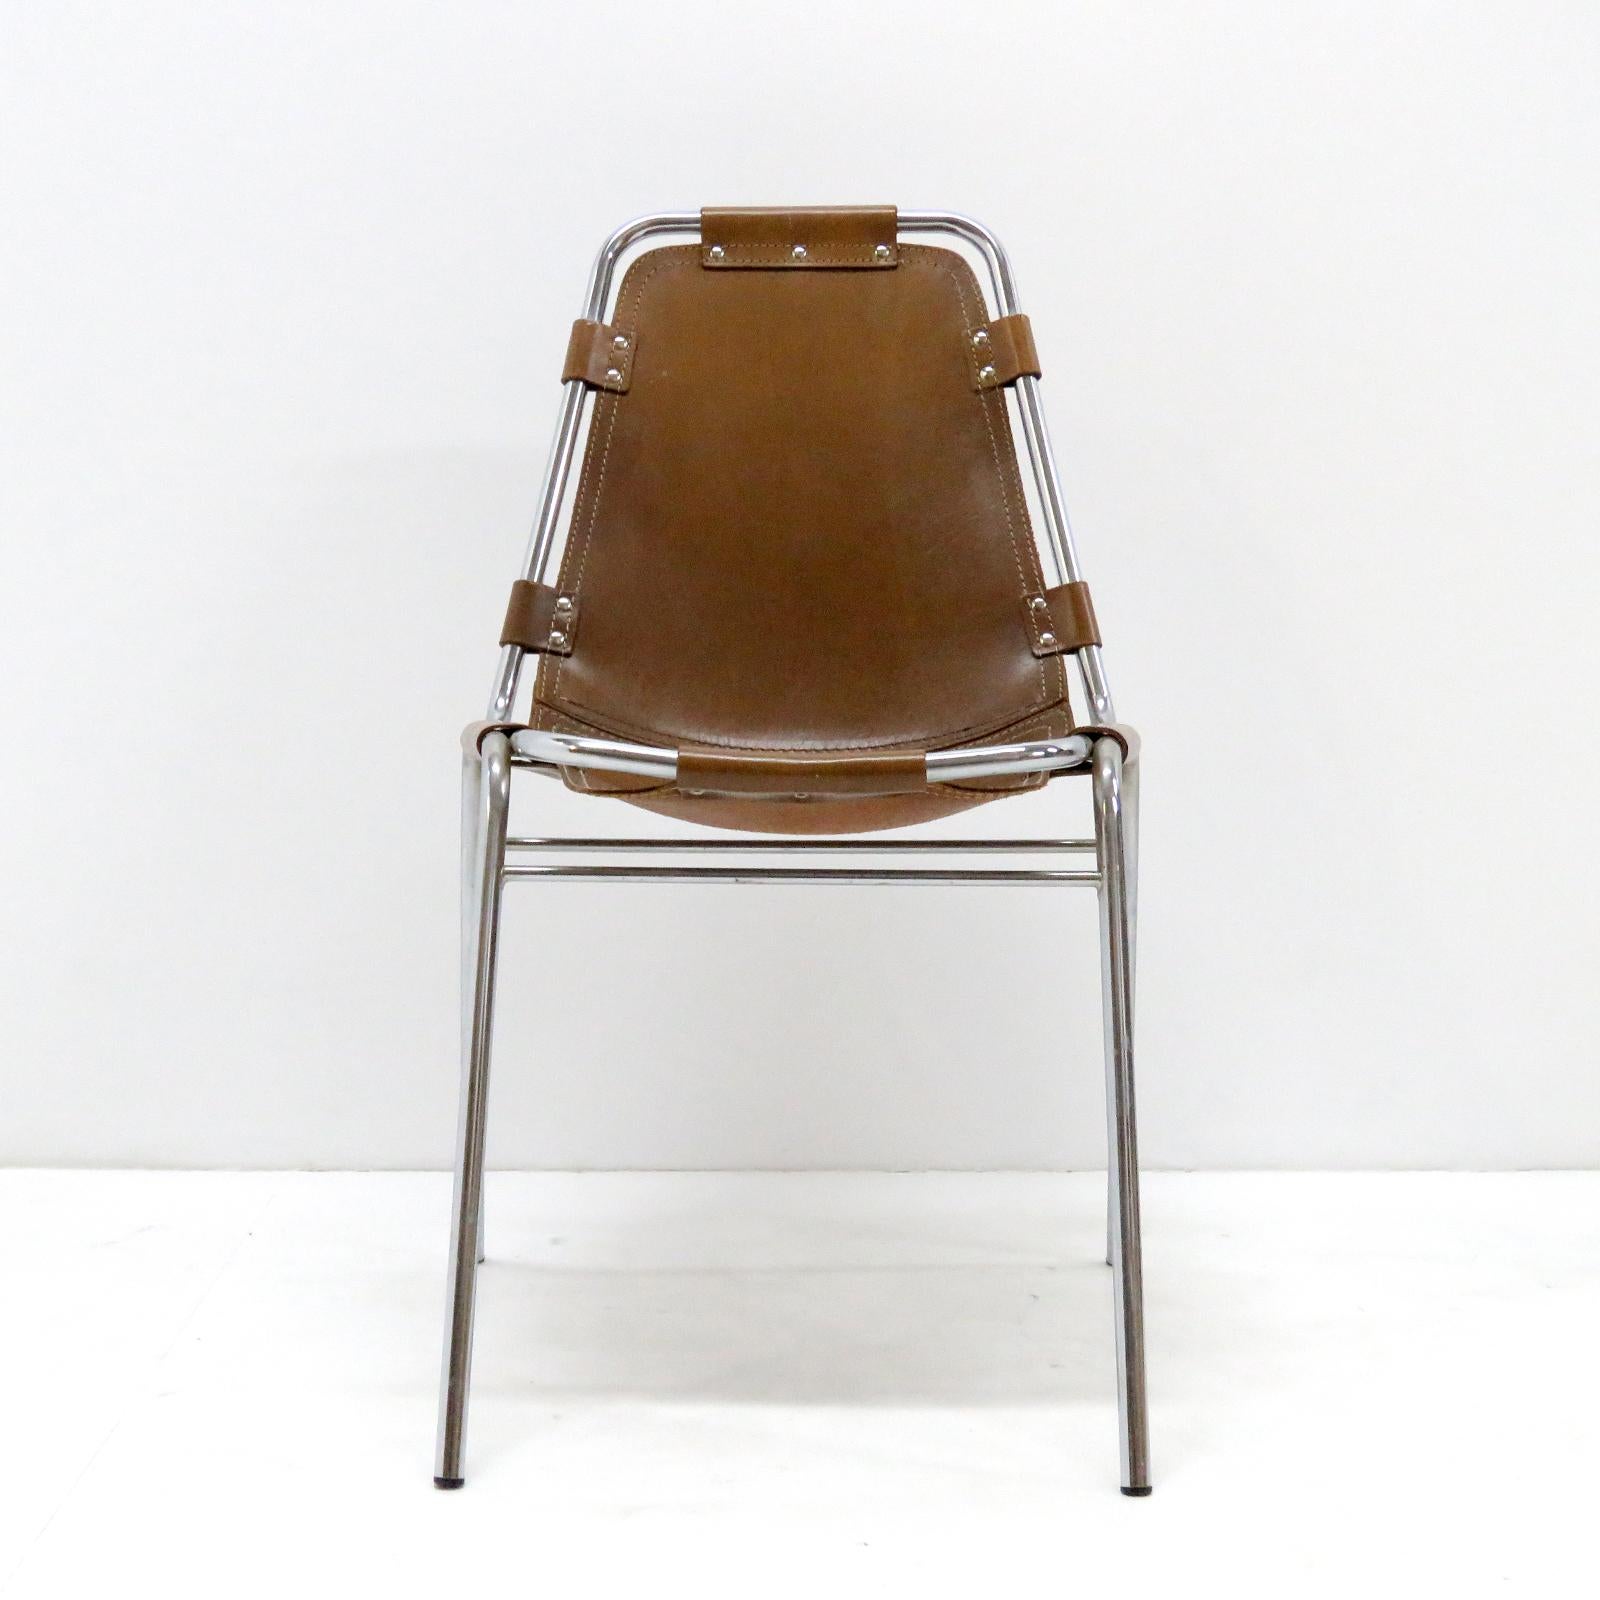 Iconic leather and metal side chairs selected by Charlotte Perriand for the Ski resort Les Arcs in 1960, with chrome tubular frame in great condition and high quality thick leather seat with a fantastic patina to the leather. Priced individually.